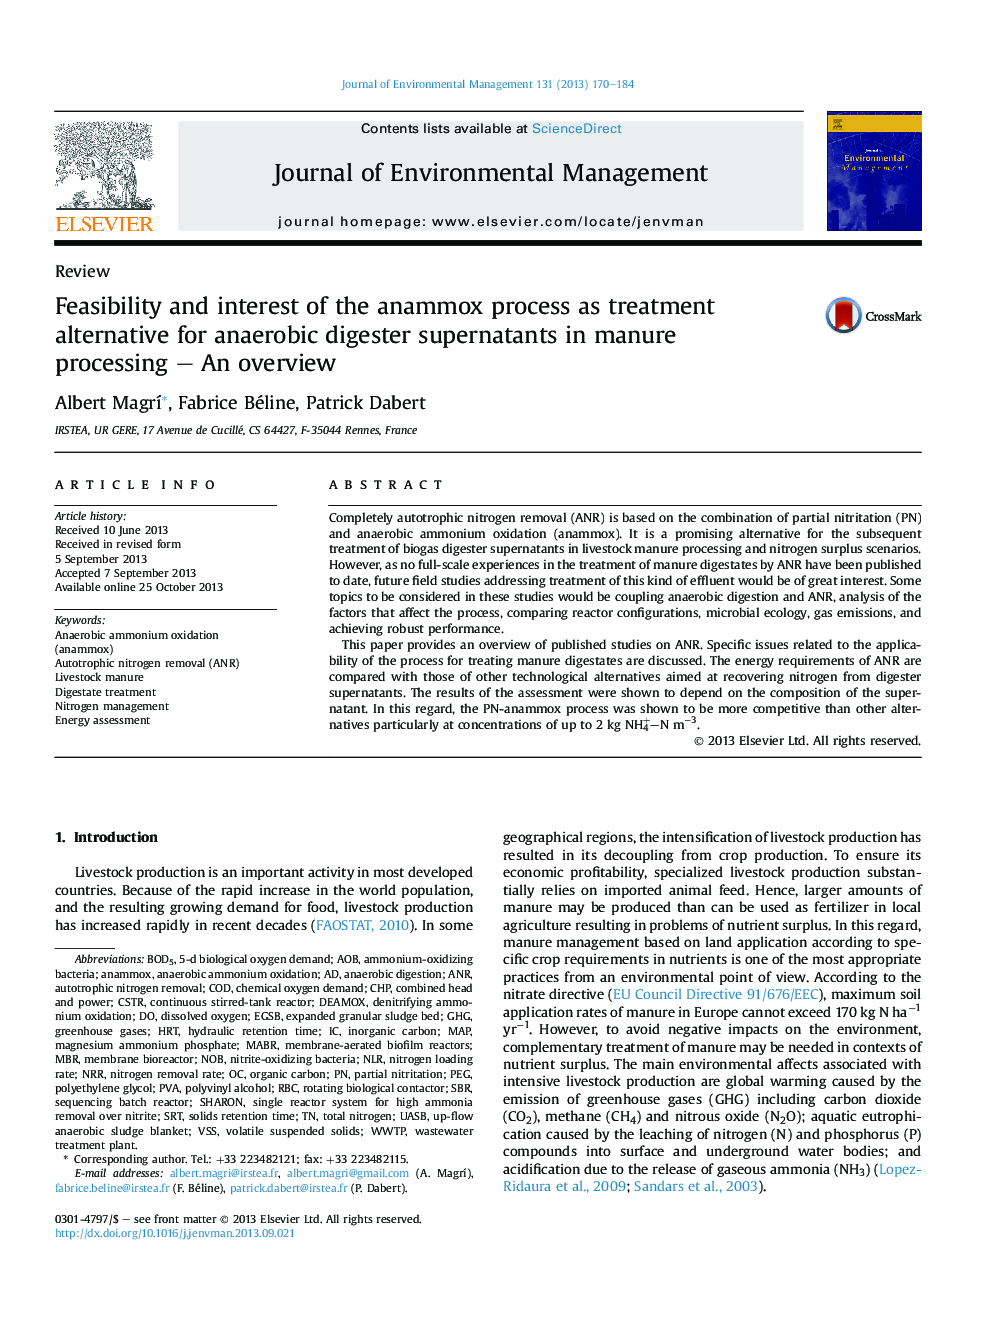 Feasibility and interest of the anammox process as treatment alternative for anaerobic digester supernatants in manure processing – An overview